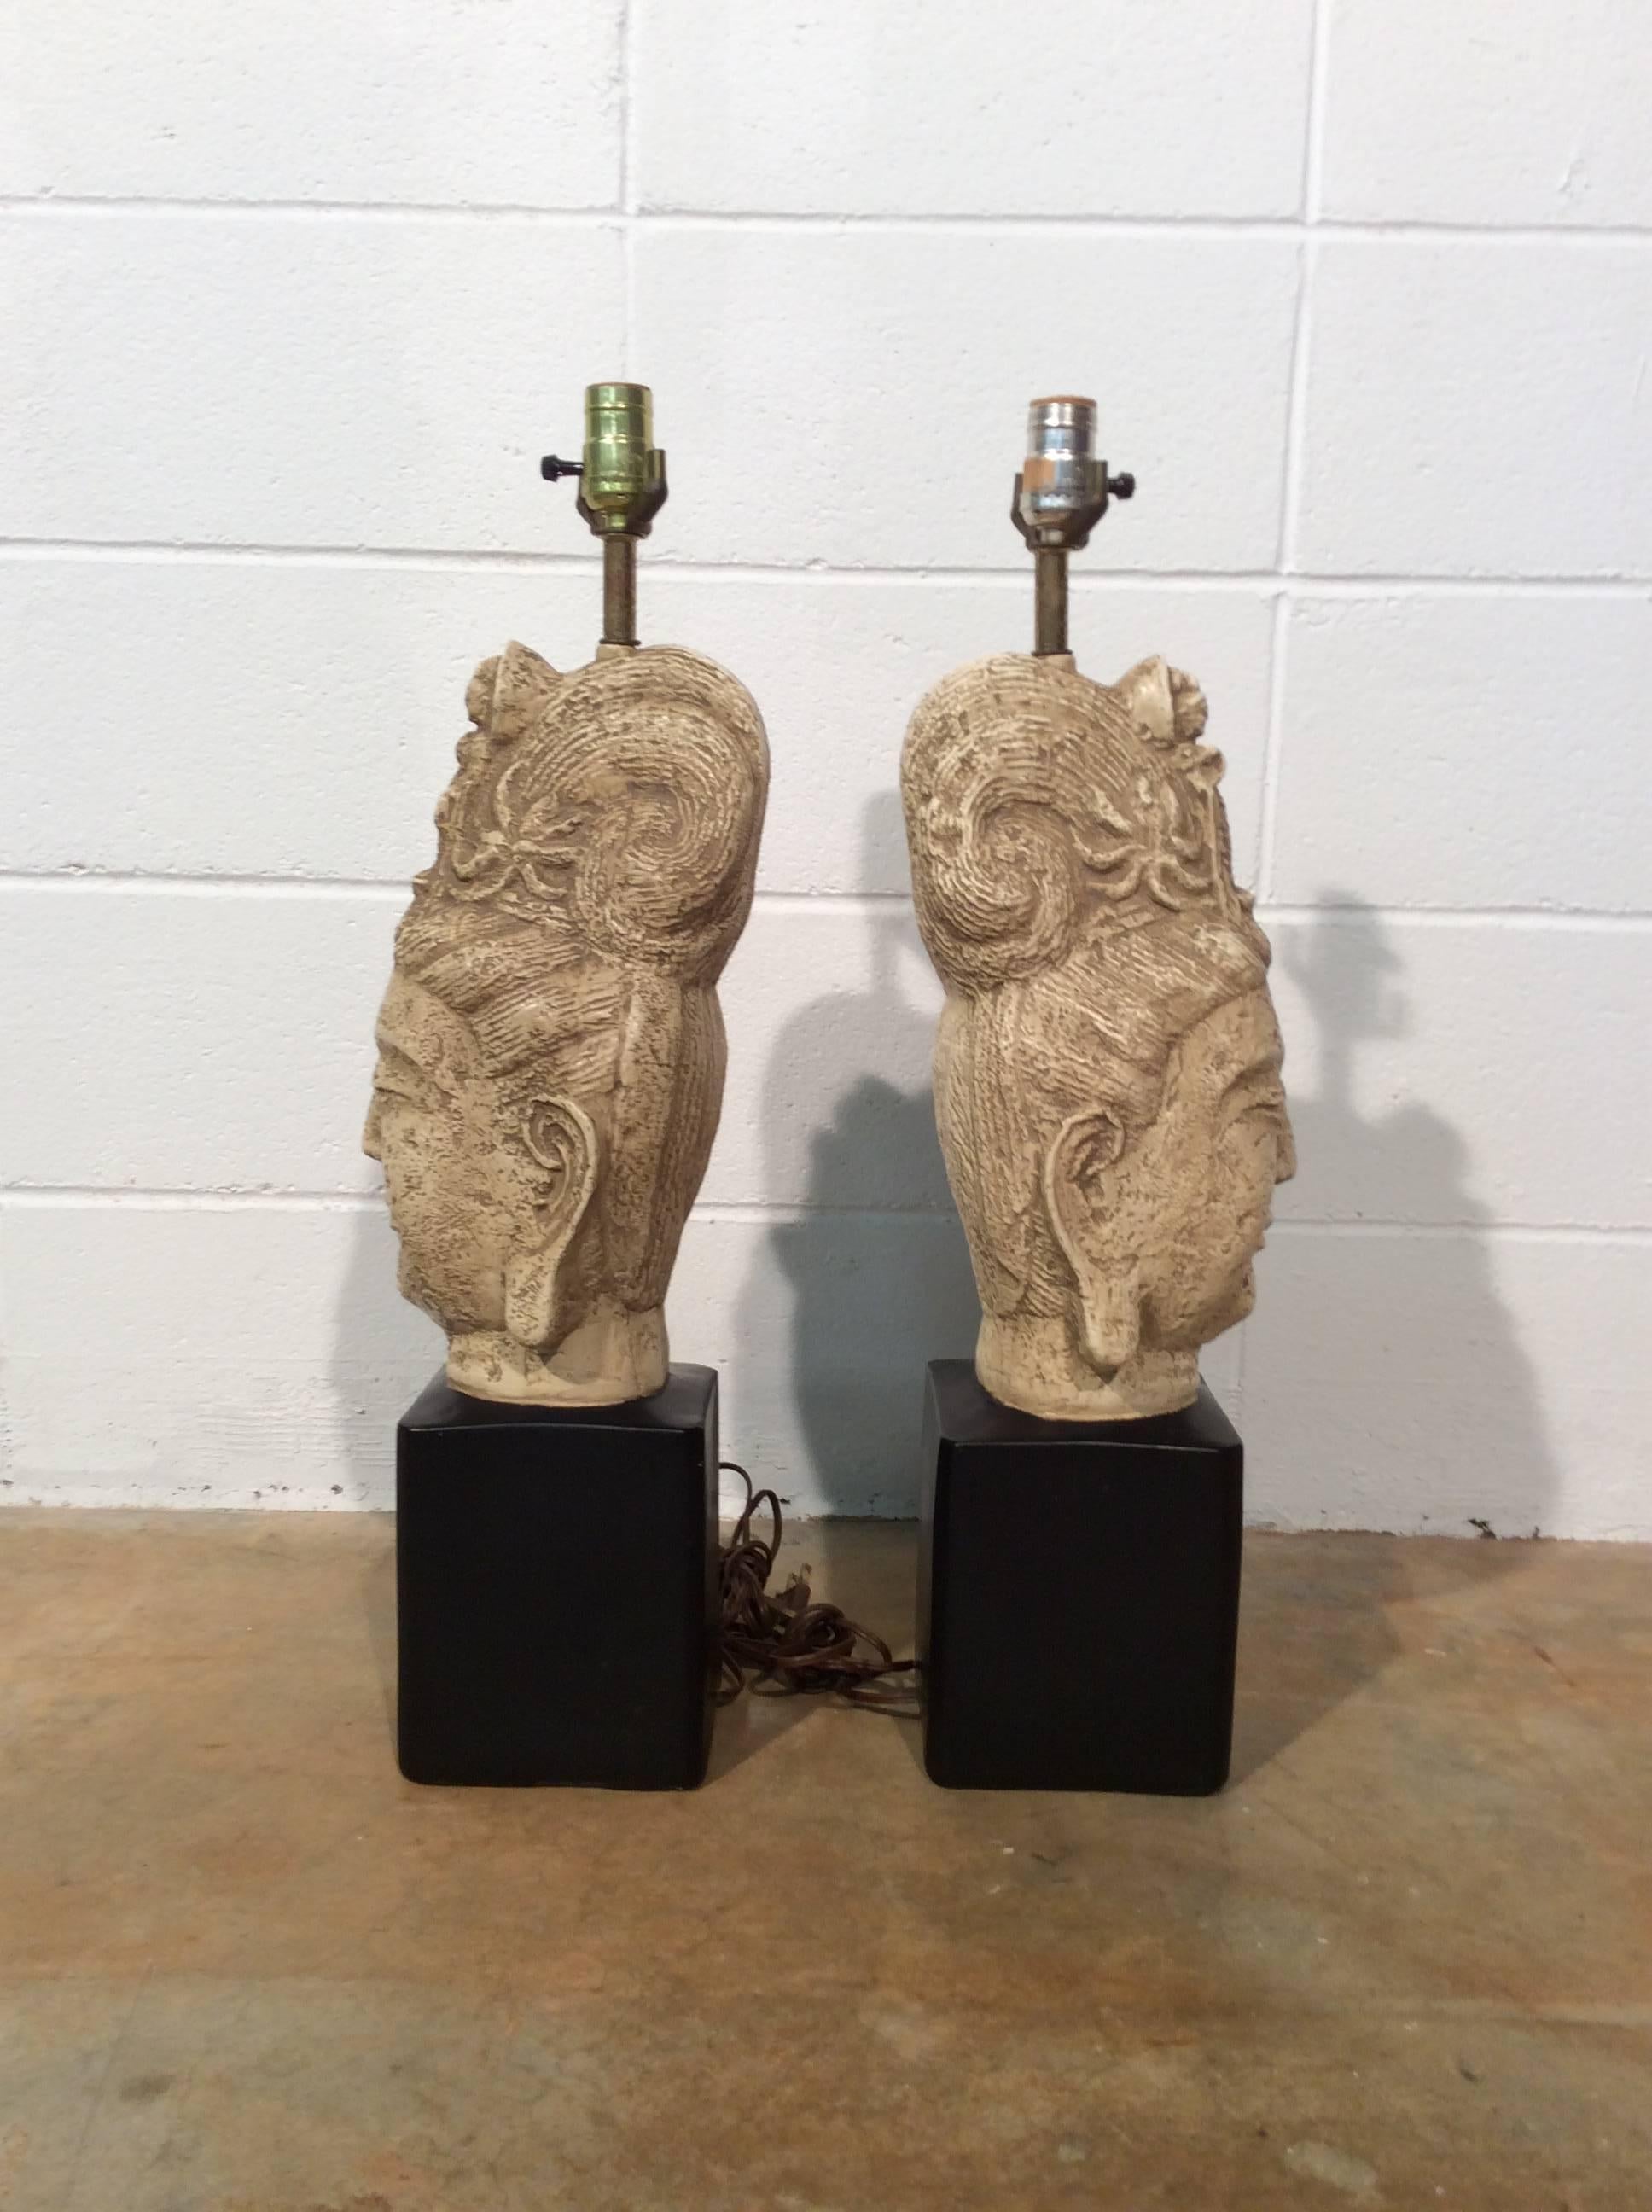 A stunning and sought after pair of ceramic Buddha lamps attributed to James Mont. Lamps are in as found condition with only very minimal wear. Looks like one socket has been replaced. Lamps are in working order with no major issues to report.